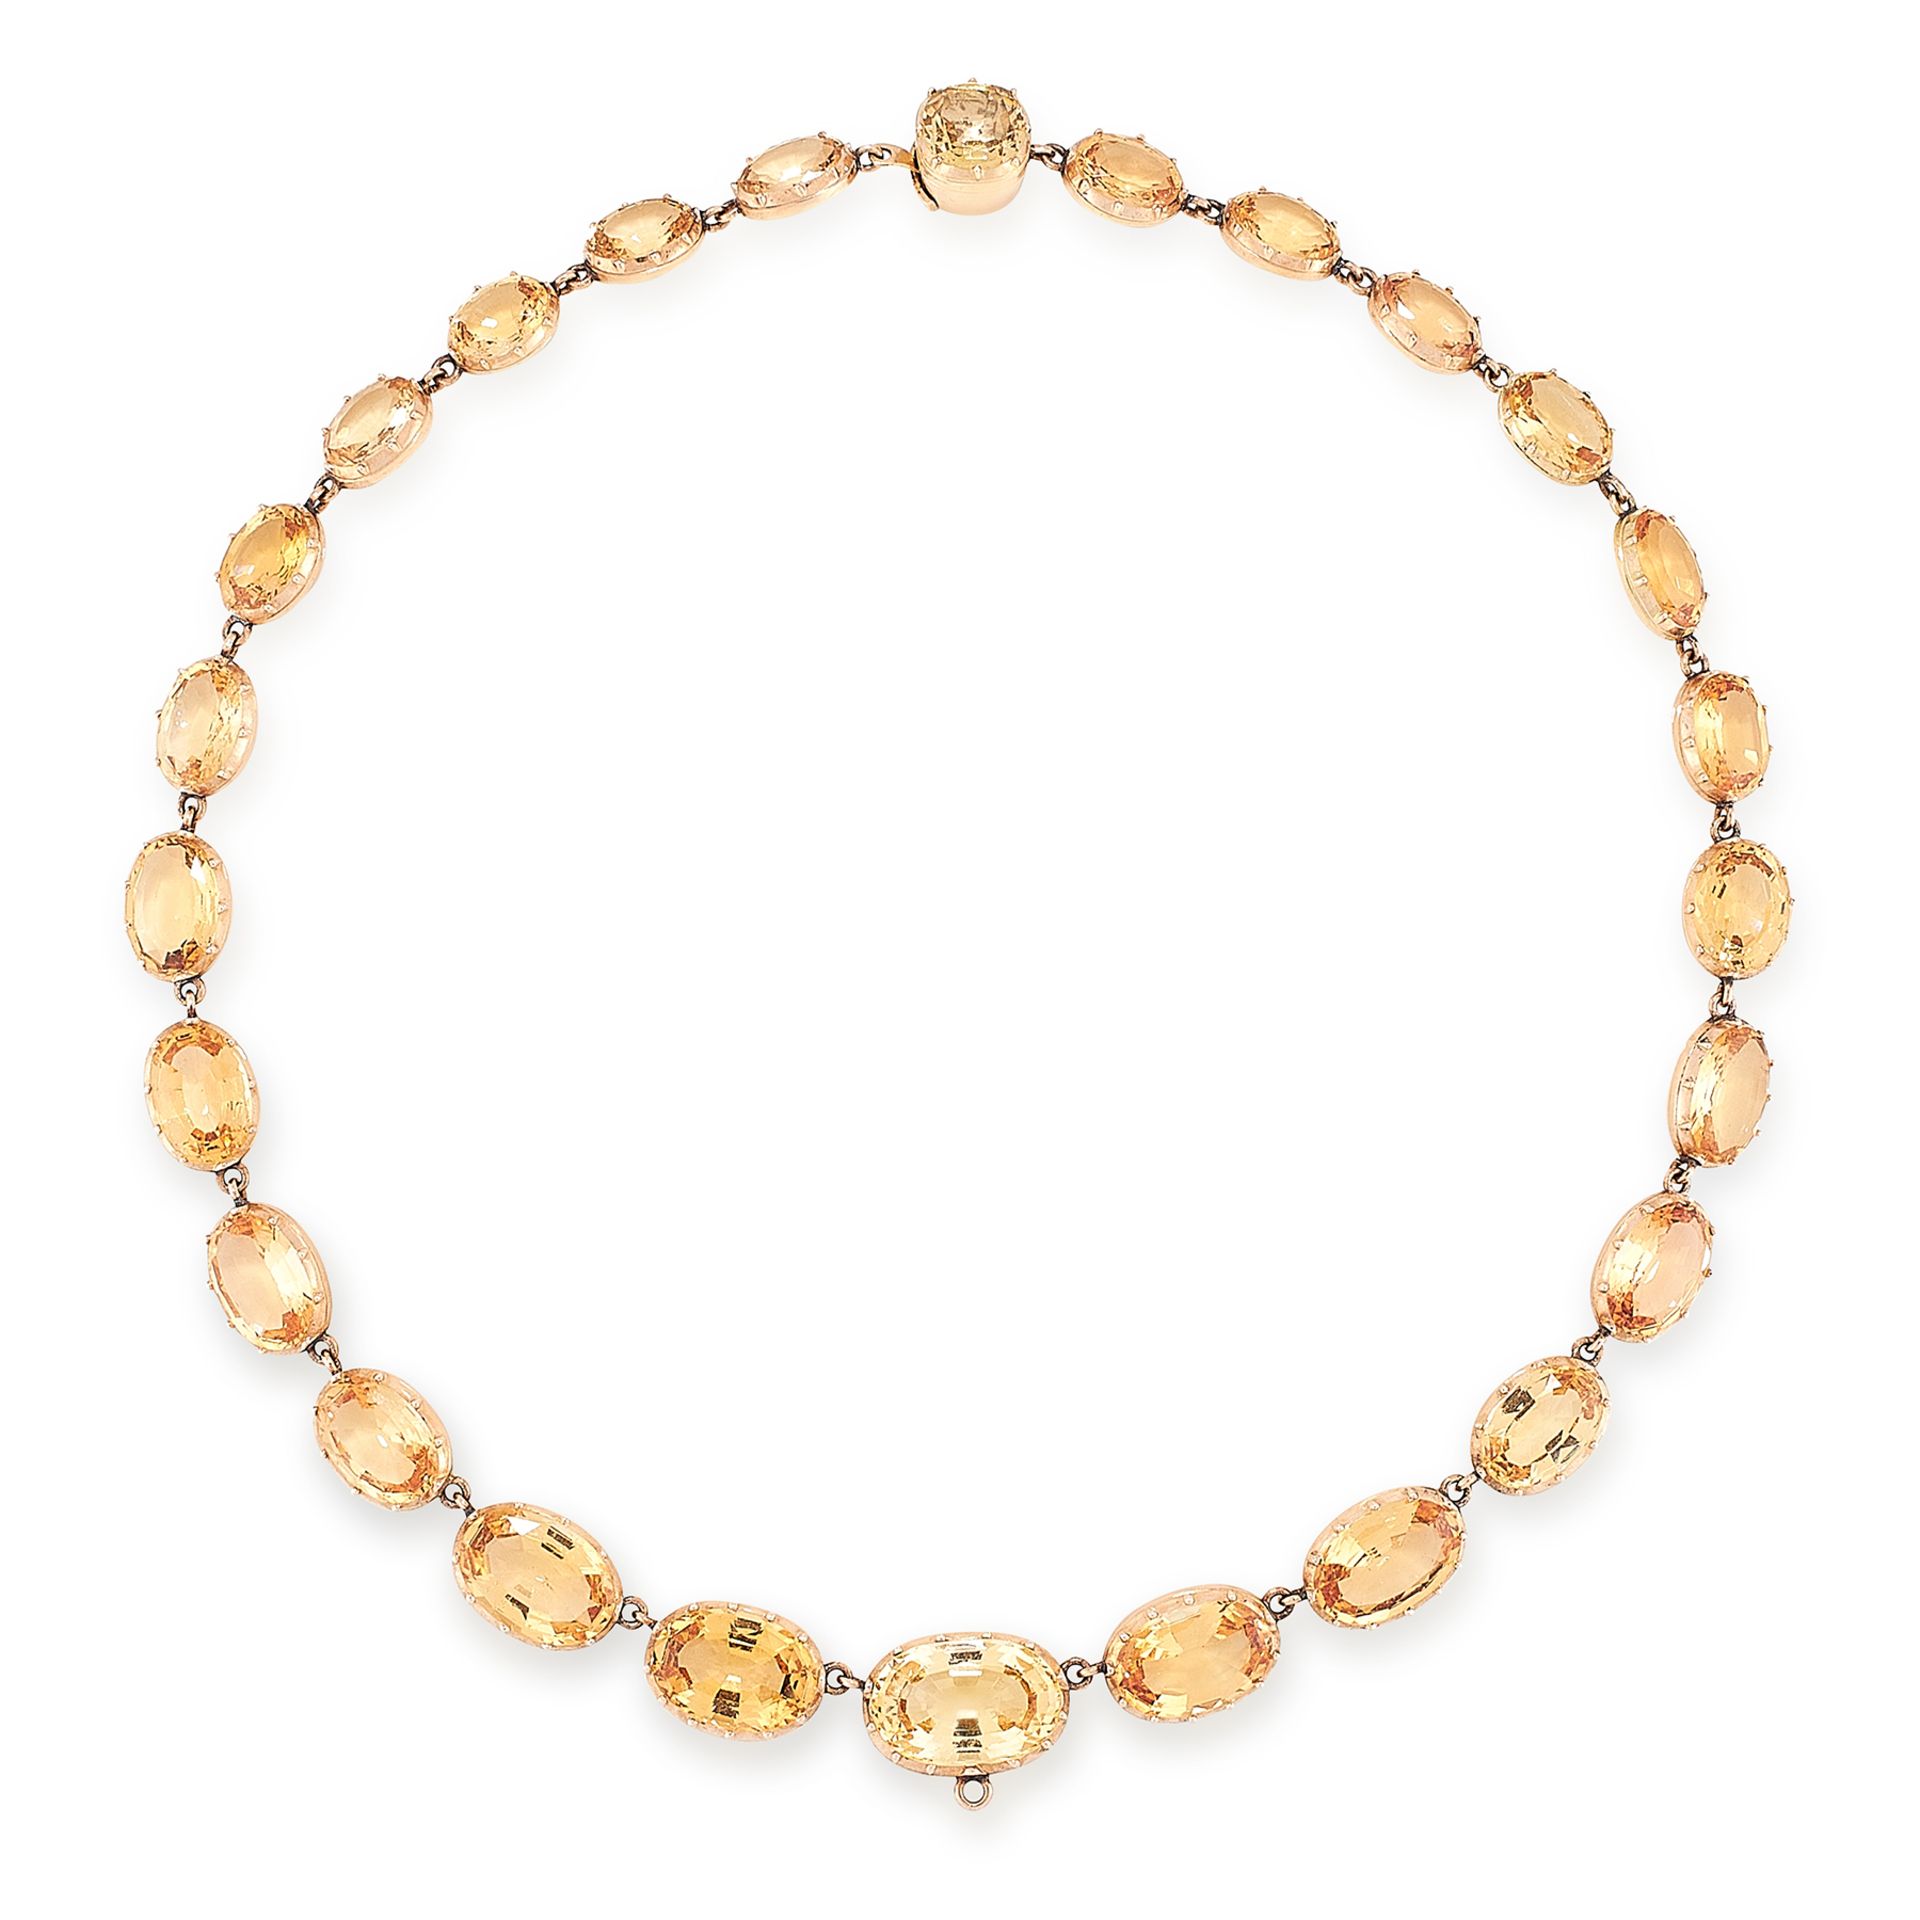 AN ANTIQUE IMPERIAL TOPAZ RIVIERE NECKLACE, 19TH CENTURY in yellow gold, comprising a single row